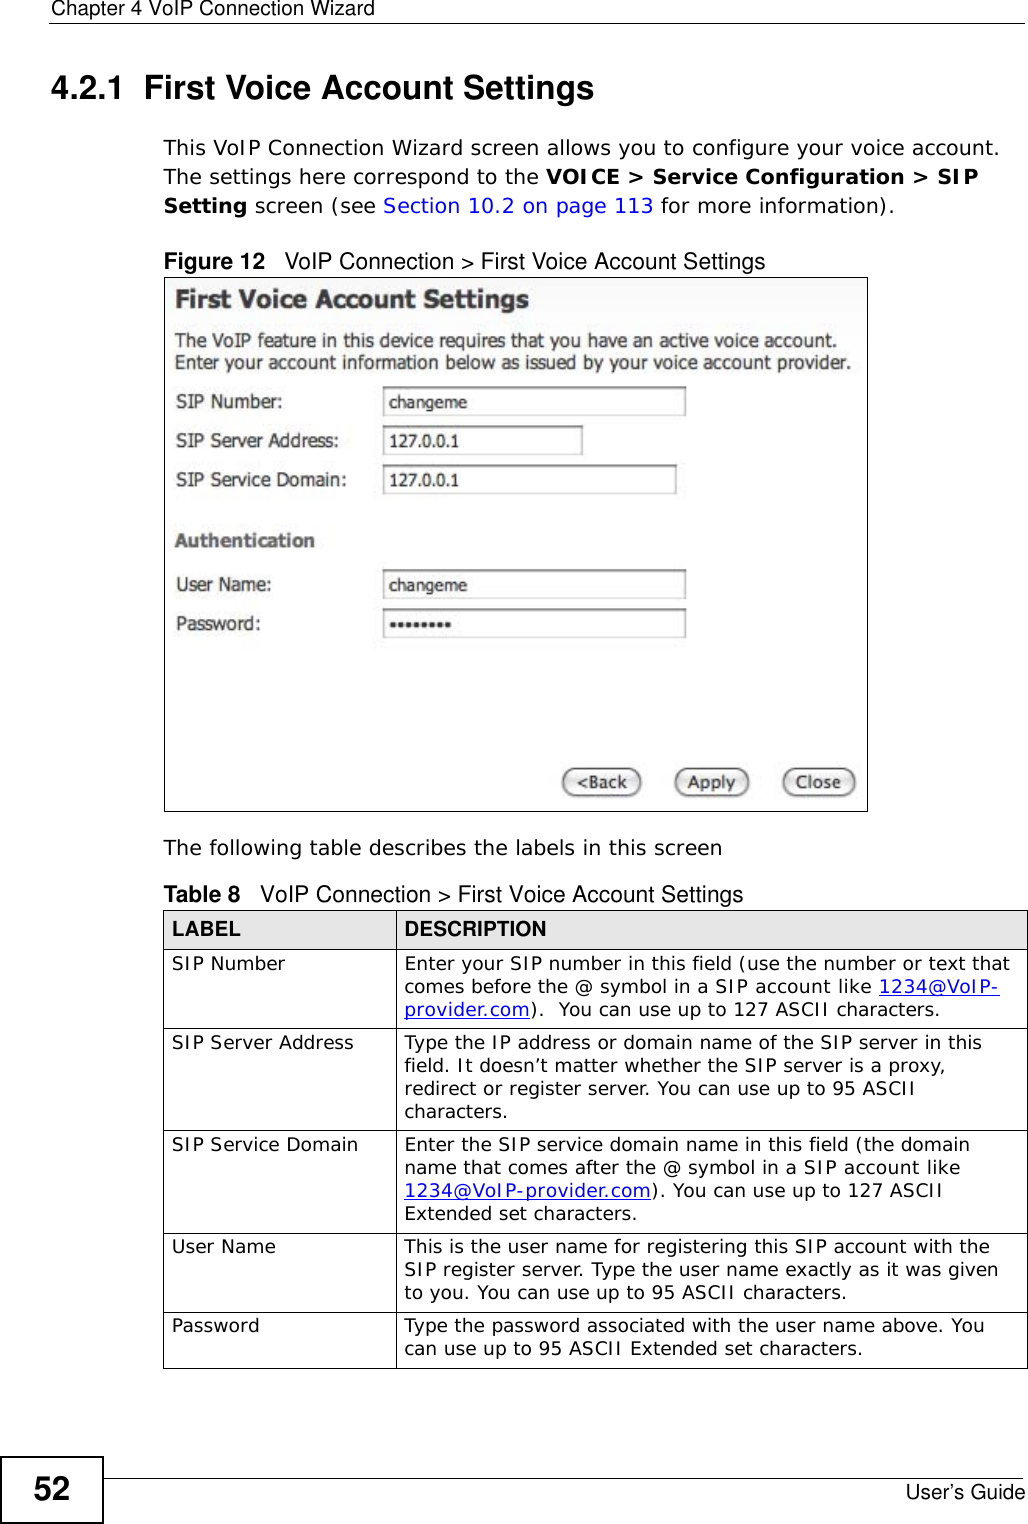 Chapter 4 VoIP Connection WizardUser’s Guide524.2.1  First Voice Account SettingsThis VoIP Connection Wizard screen allows you to configure your voice account. The settings here correspond to the VOICE &gt; Service Configuration &gt; SIP Setting screen (see Section 10.2 on page 113 for more information).Figure 12   VoIP Connection &gt; First Voice Account SettingsThe following table describes the labels in this screenTable 8   VoIP Connection &gt; First Voice Account SettingsLABEL DESCRIPTIONSIP Number Enter your SIP number in this field (use the number or text that comes before the @ symbol in a SIP account like 1234@VoIP-provider.com).  You can use up to 127 ASCII characters.SIP Server Address Type the IP address or domain name of the SIP server in this field. It doesn’t matter whether the SIP server is a proxy, redirect or register server. You can use up to 95 ASCII characters.SIP Service Domain Enter the SIP service domain name in this field (the domain name that comes after the @ symbol in a SIP account like 1234@VoIP-provider.com). You can use up to 127 ASCII Extended set characters.User Name This is the user name for registering this SIP account with the SIP register server. Type the user name exactly as it was given to you. You can use up to 95 ASCII characters.Password Type the password associated with the user name above. You can use up to 95 ASCII Extended set characters.